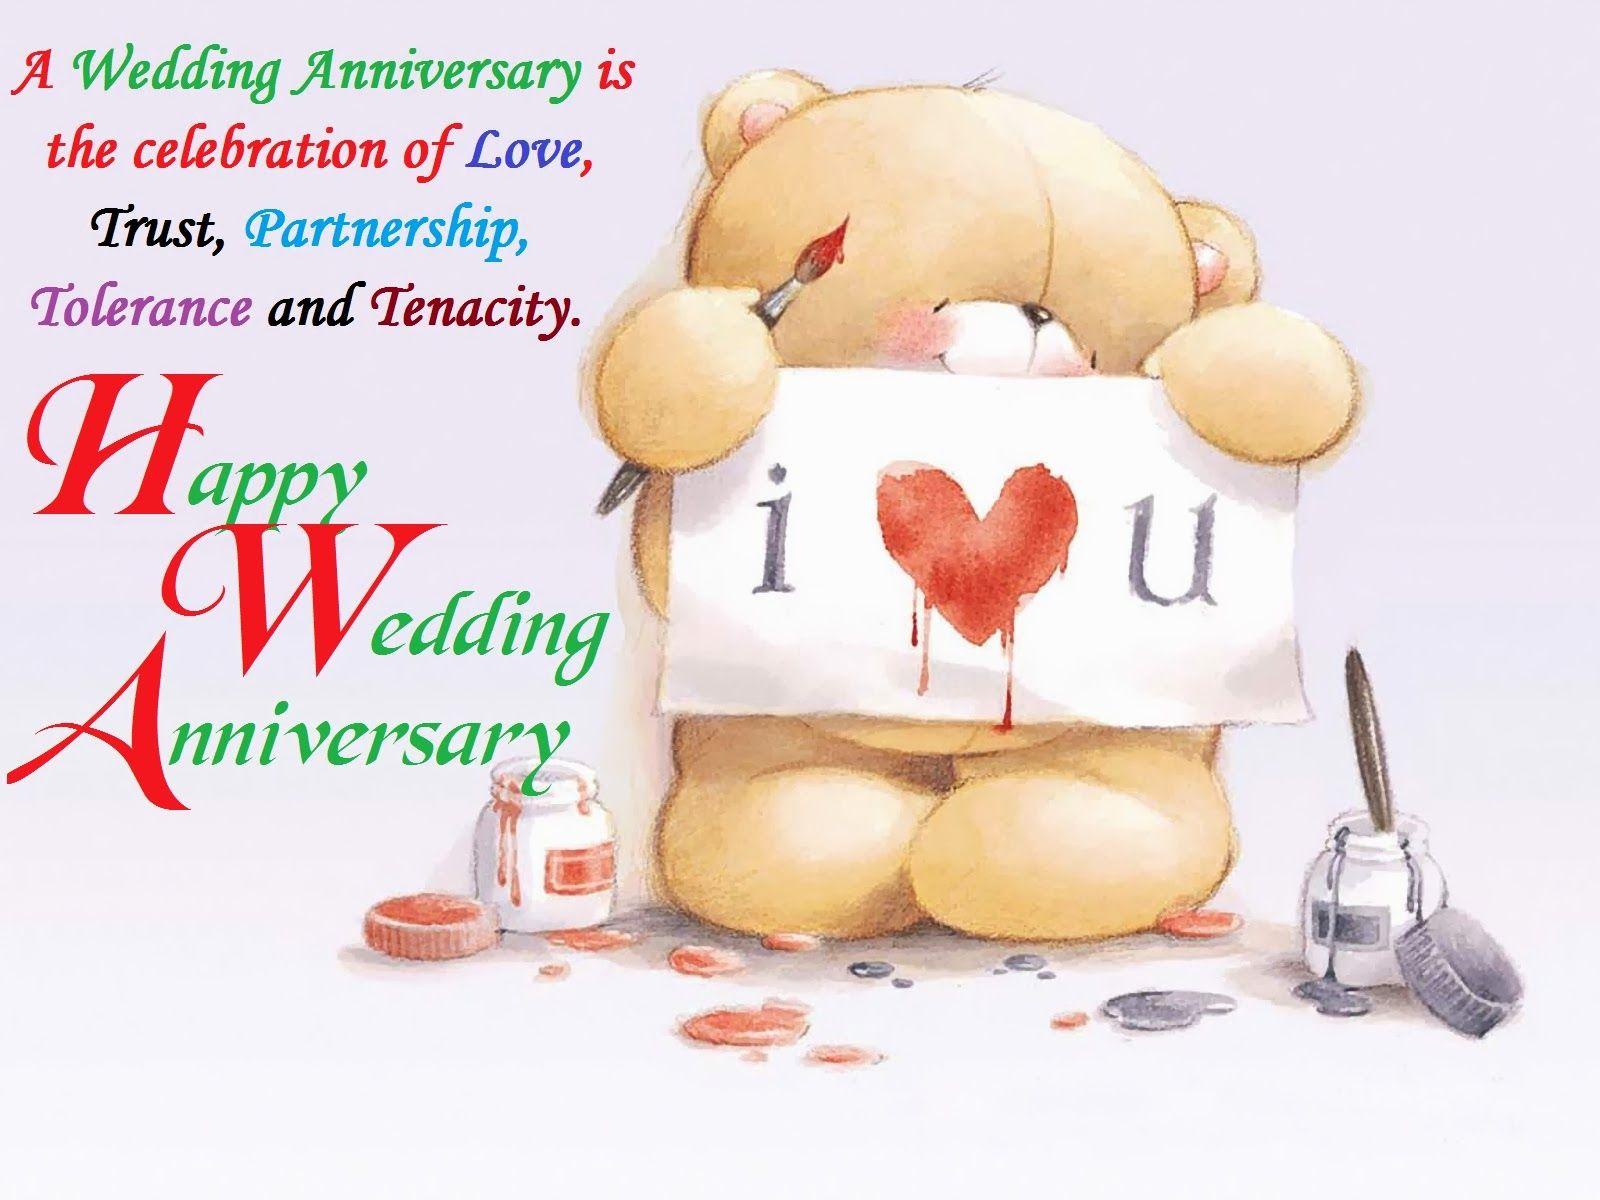 Wishes for Happy anniversary Image Wallpaper best wedding